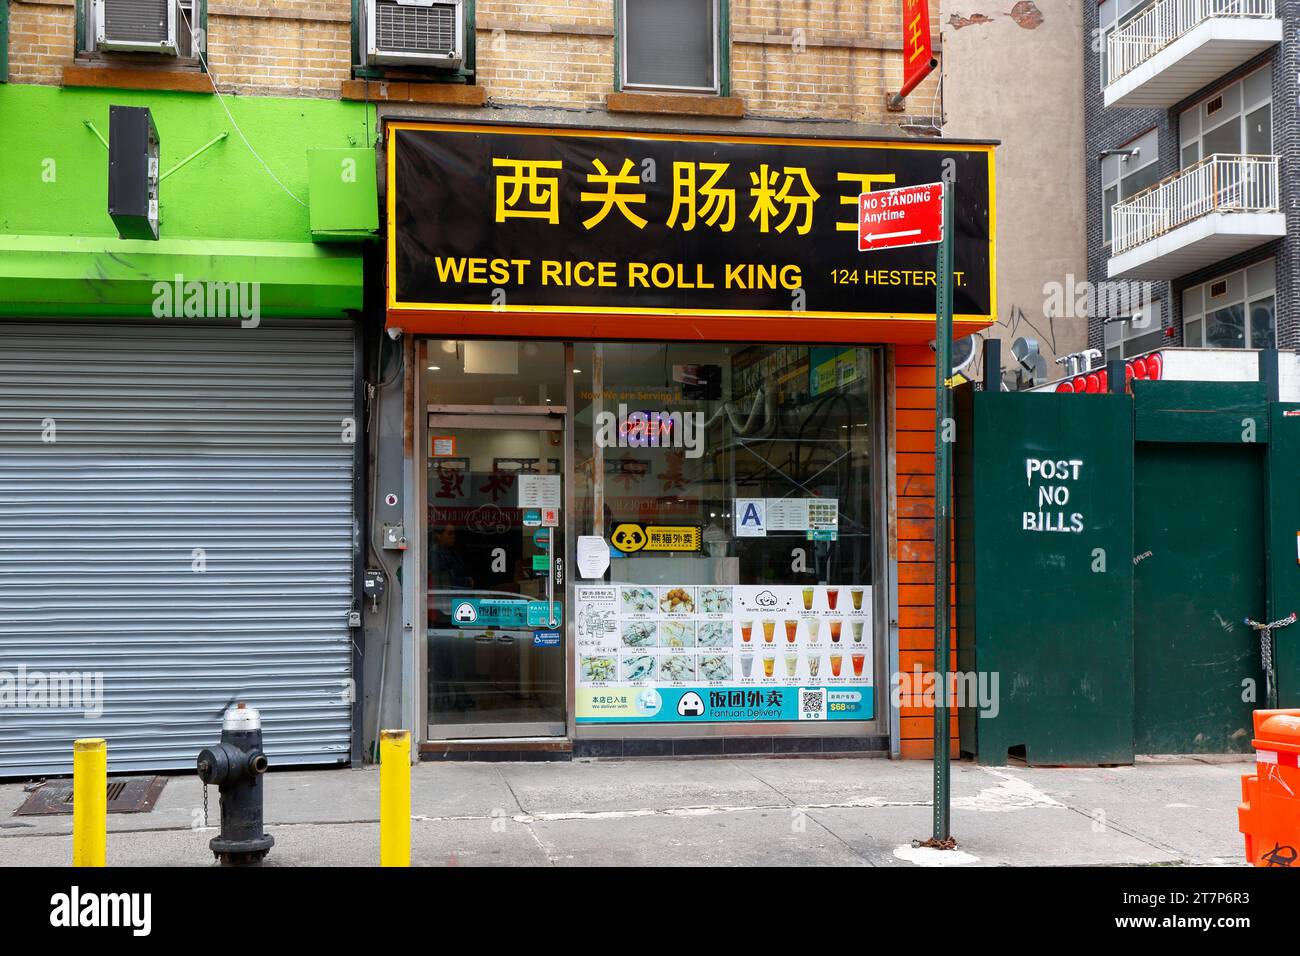 West Rice Roll King 西关肠粉王, 124 Hester St, New York, NYC storefront photo of a Chinese cheung fun restaurant in Manhattan Chinatown. Stock Photo